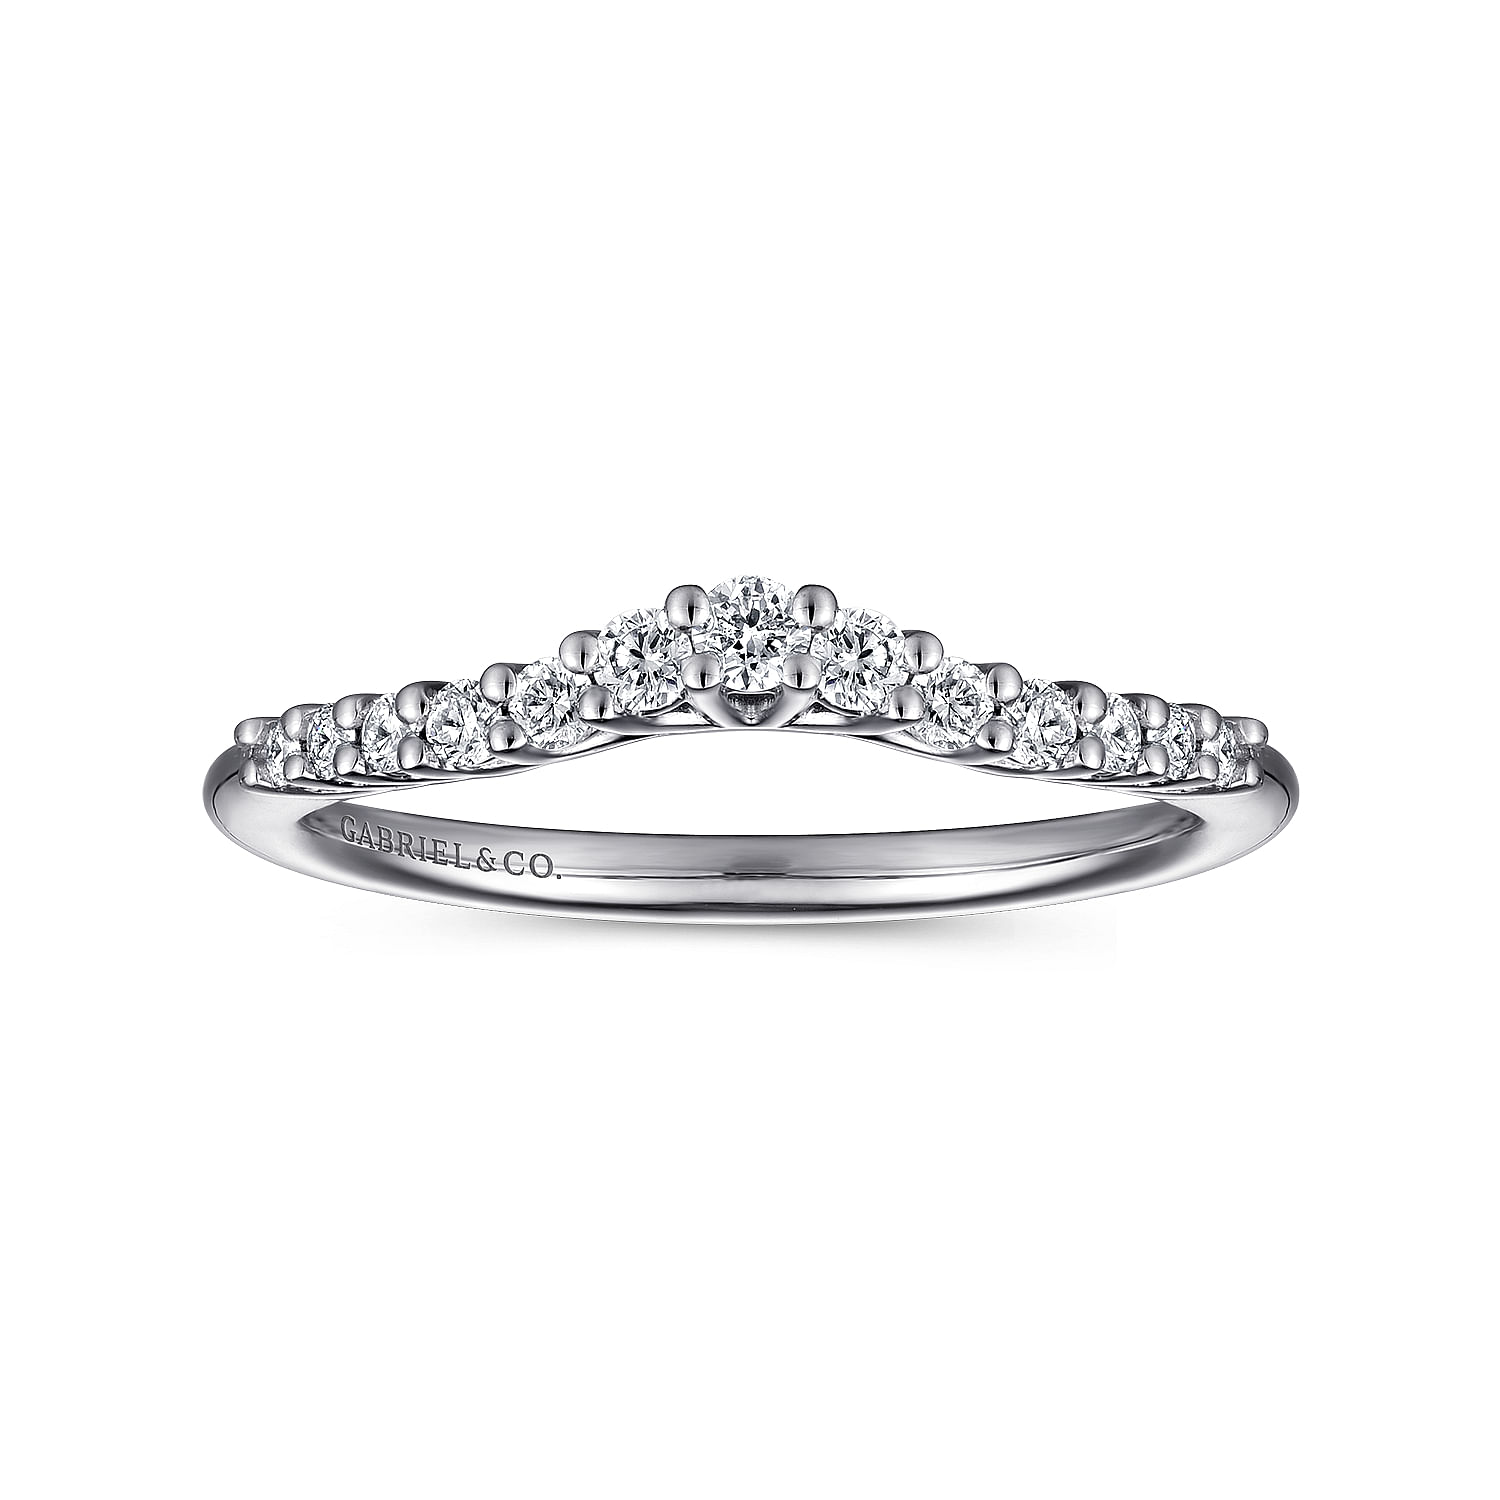 Curved 14K White Gold Shared Prong Diamond Wedding Band